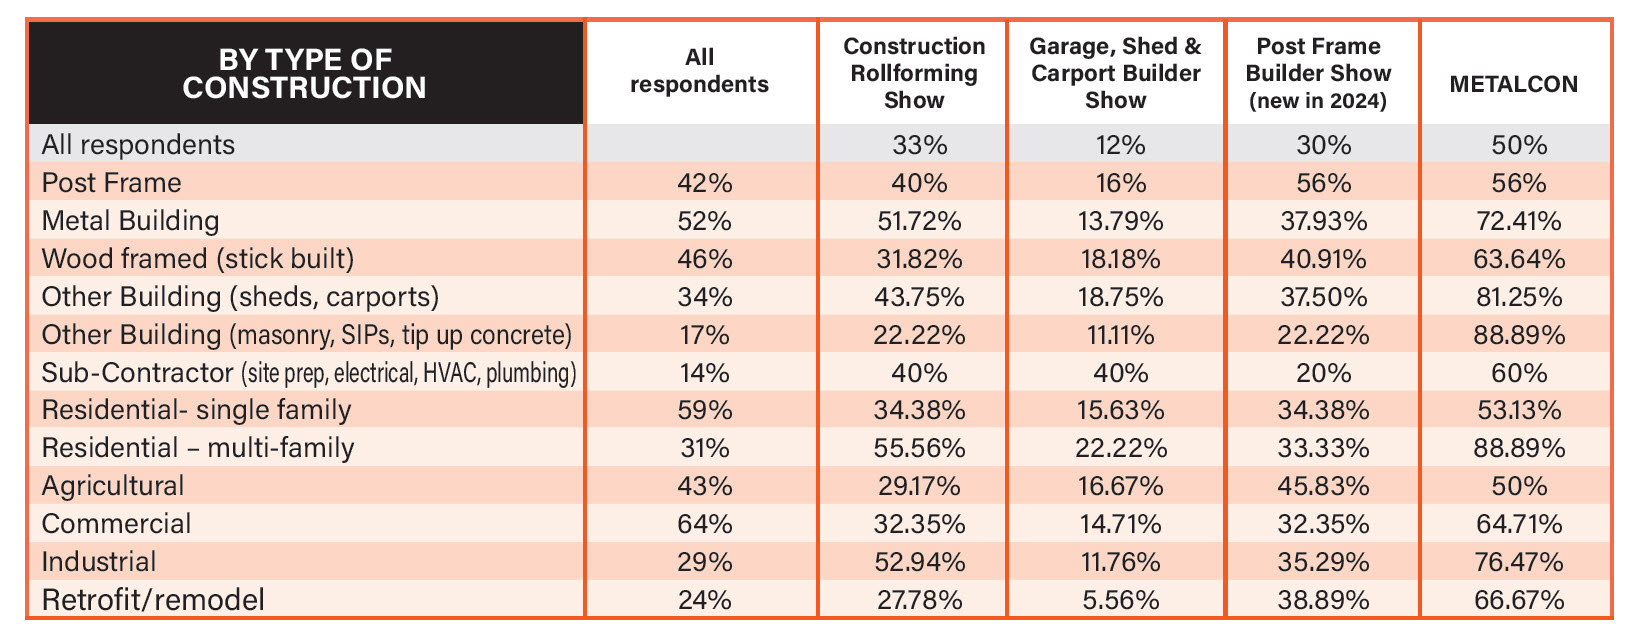 Construction Survey Insights: Subscribers and Show Attendance